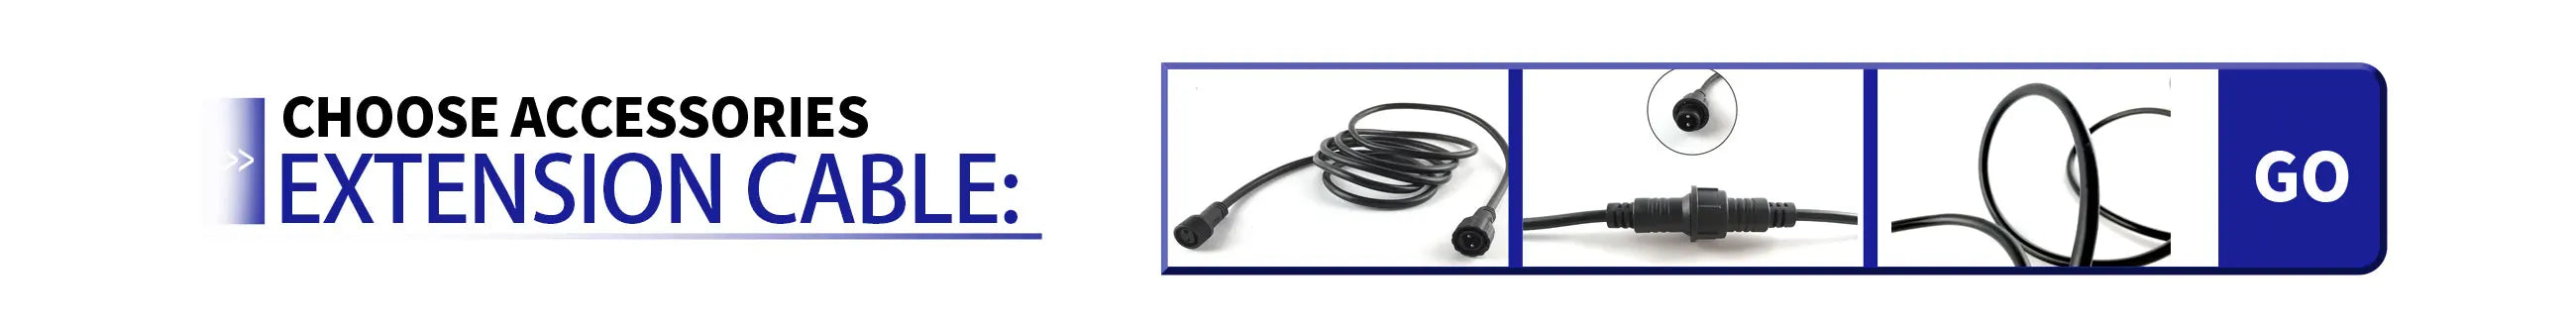 Choose an extension cable for seamless connection to accessories.